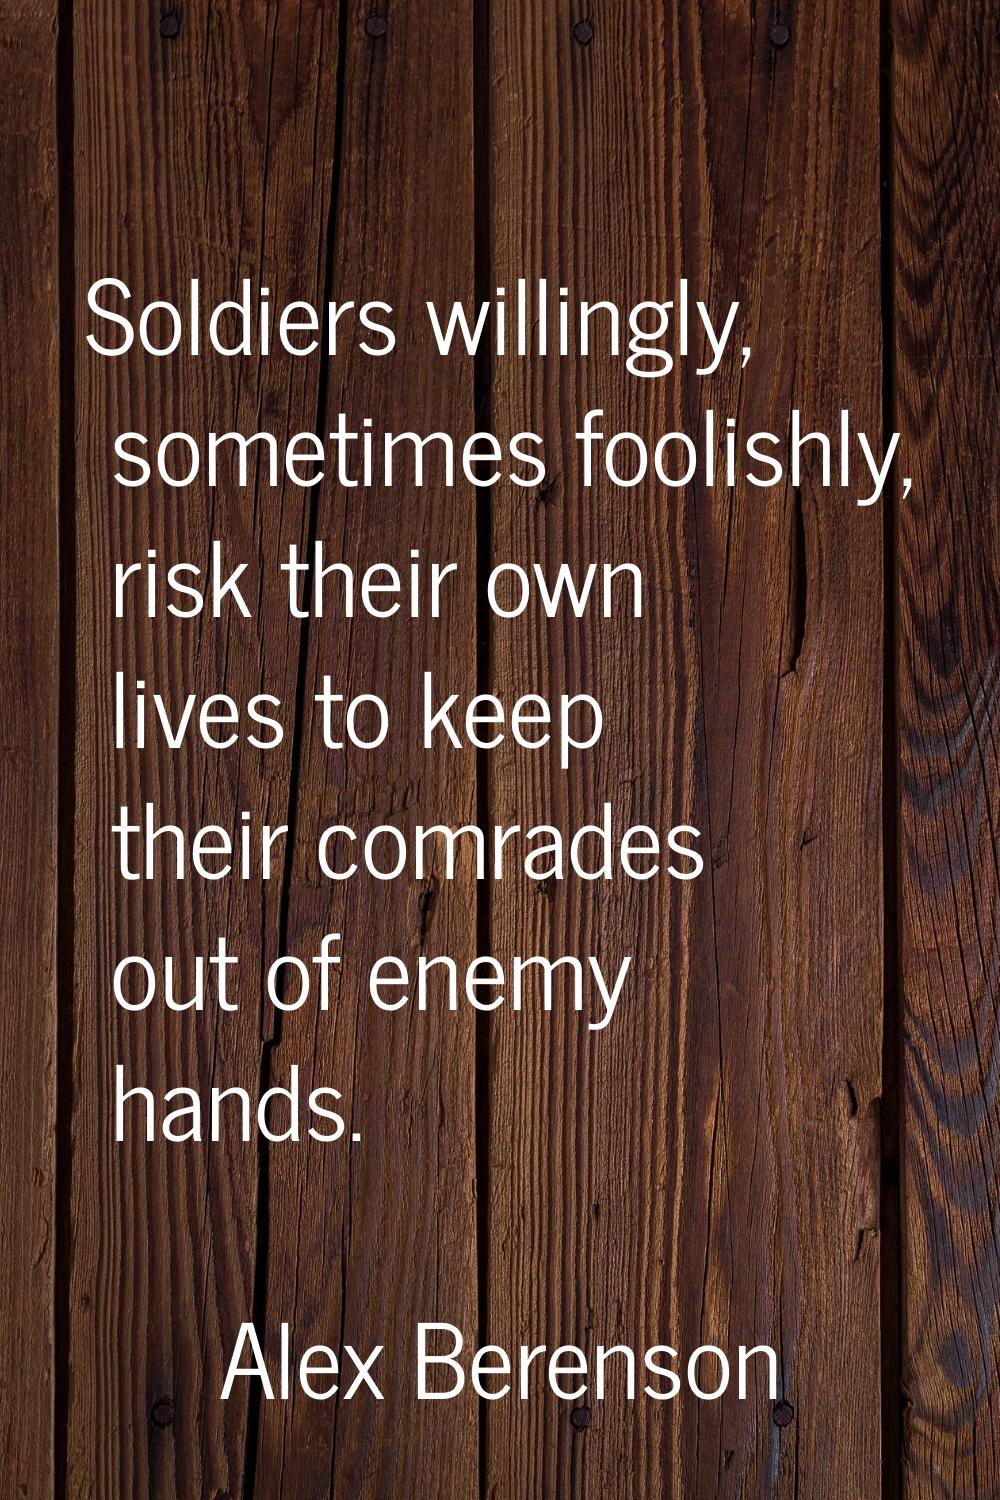 Soldiers willingly, sometimes foolishly, risk their own lives to keep their comrades out of enemy h